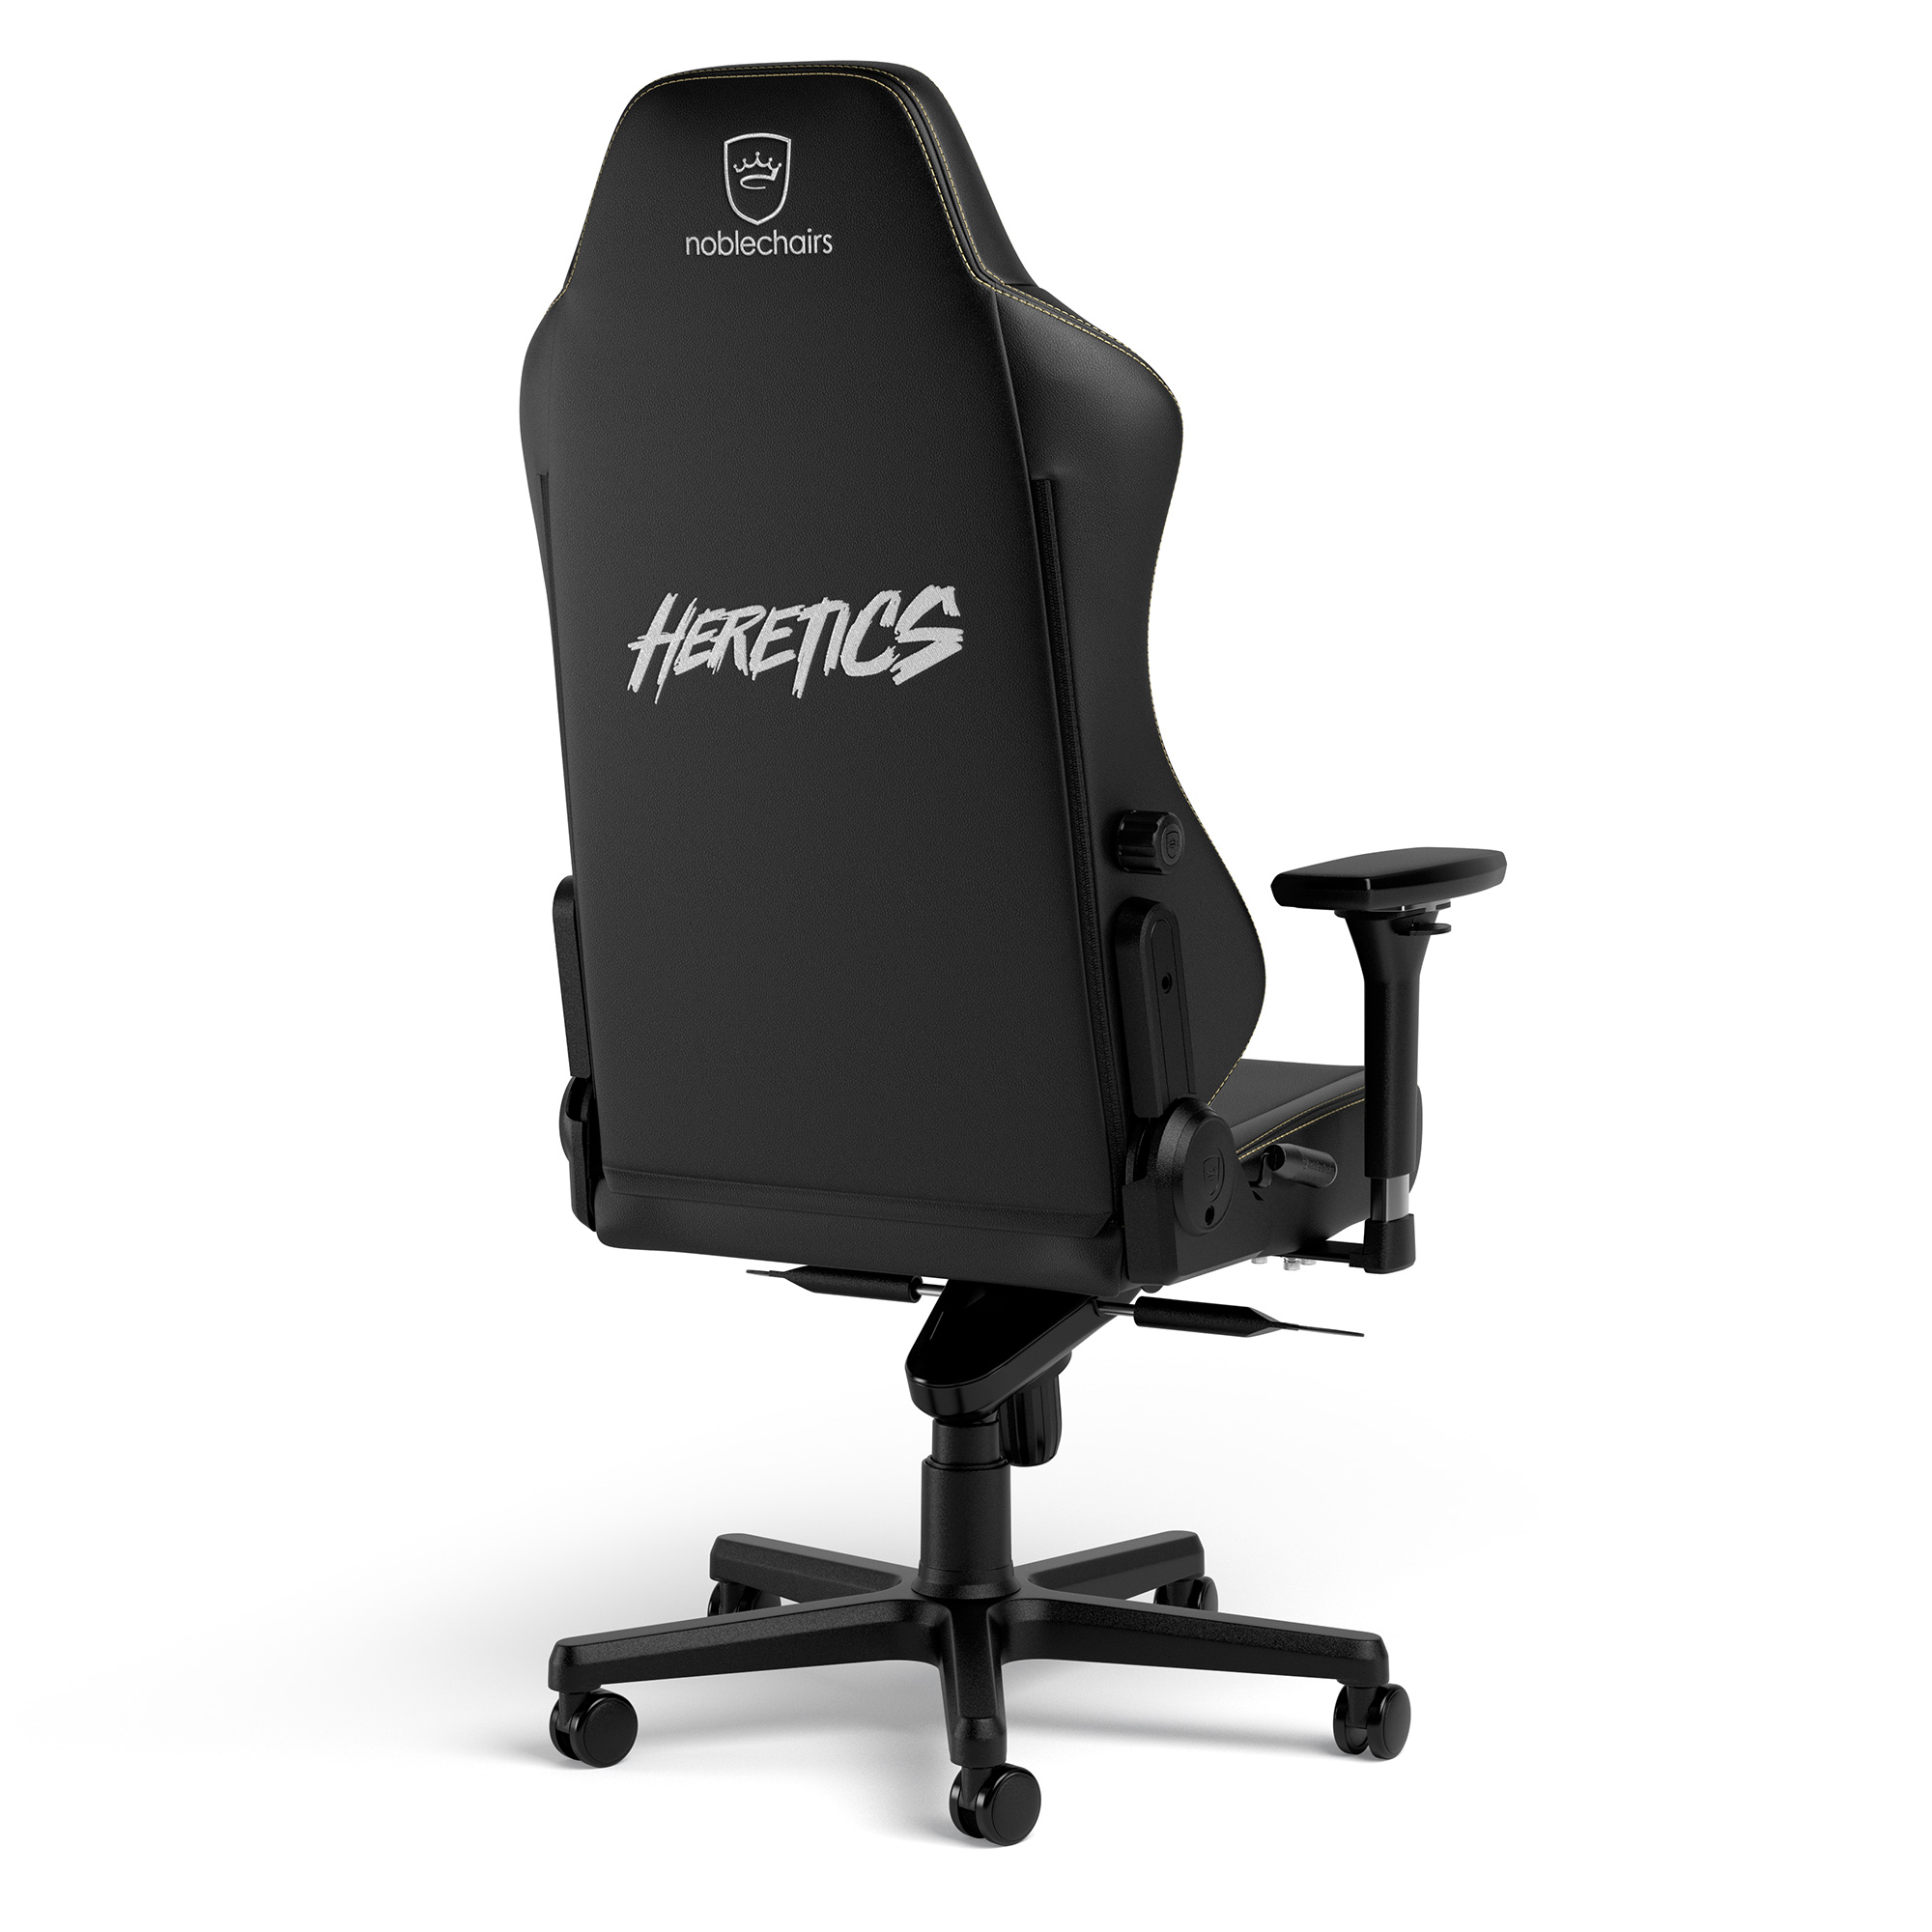 noblechairs - noblechairs HERO Gaming Chair - Team Heretics Edition